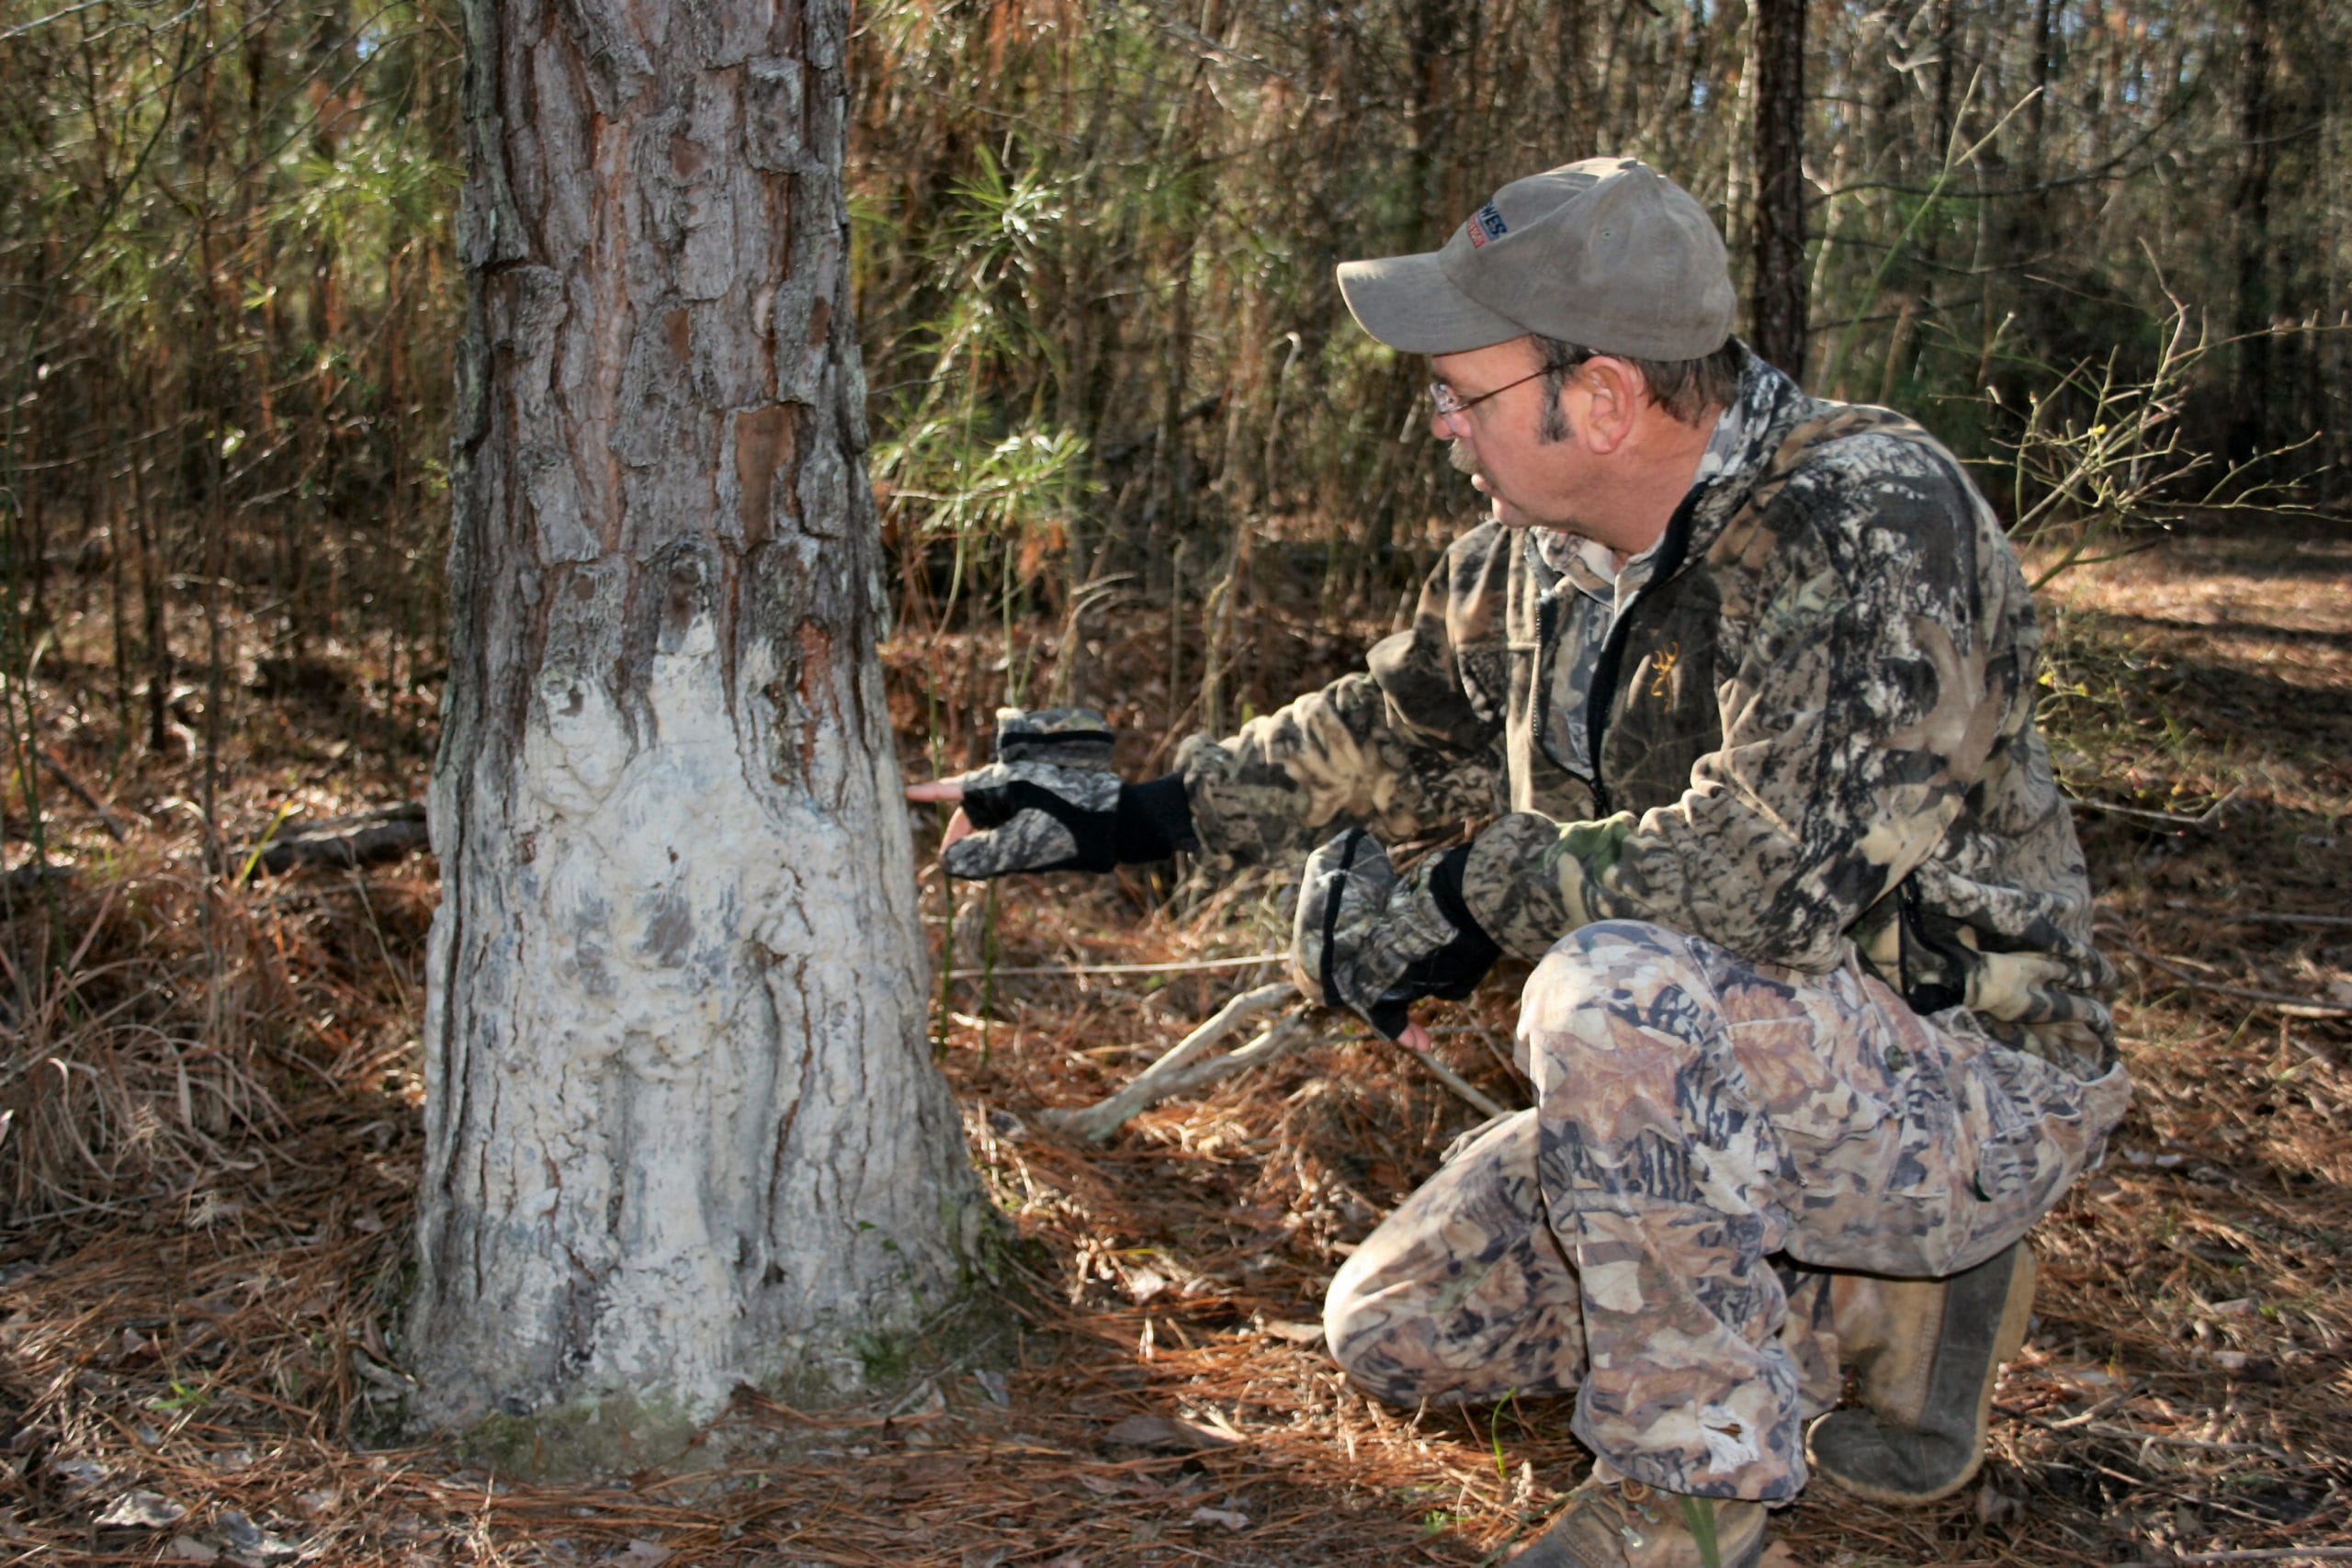 Deer hunters know to look for buck rubs when scouting. Hogs also make rubs, leaving mud on trees, which is a sure sign wild hogs are using an area.